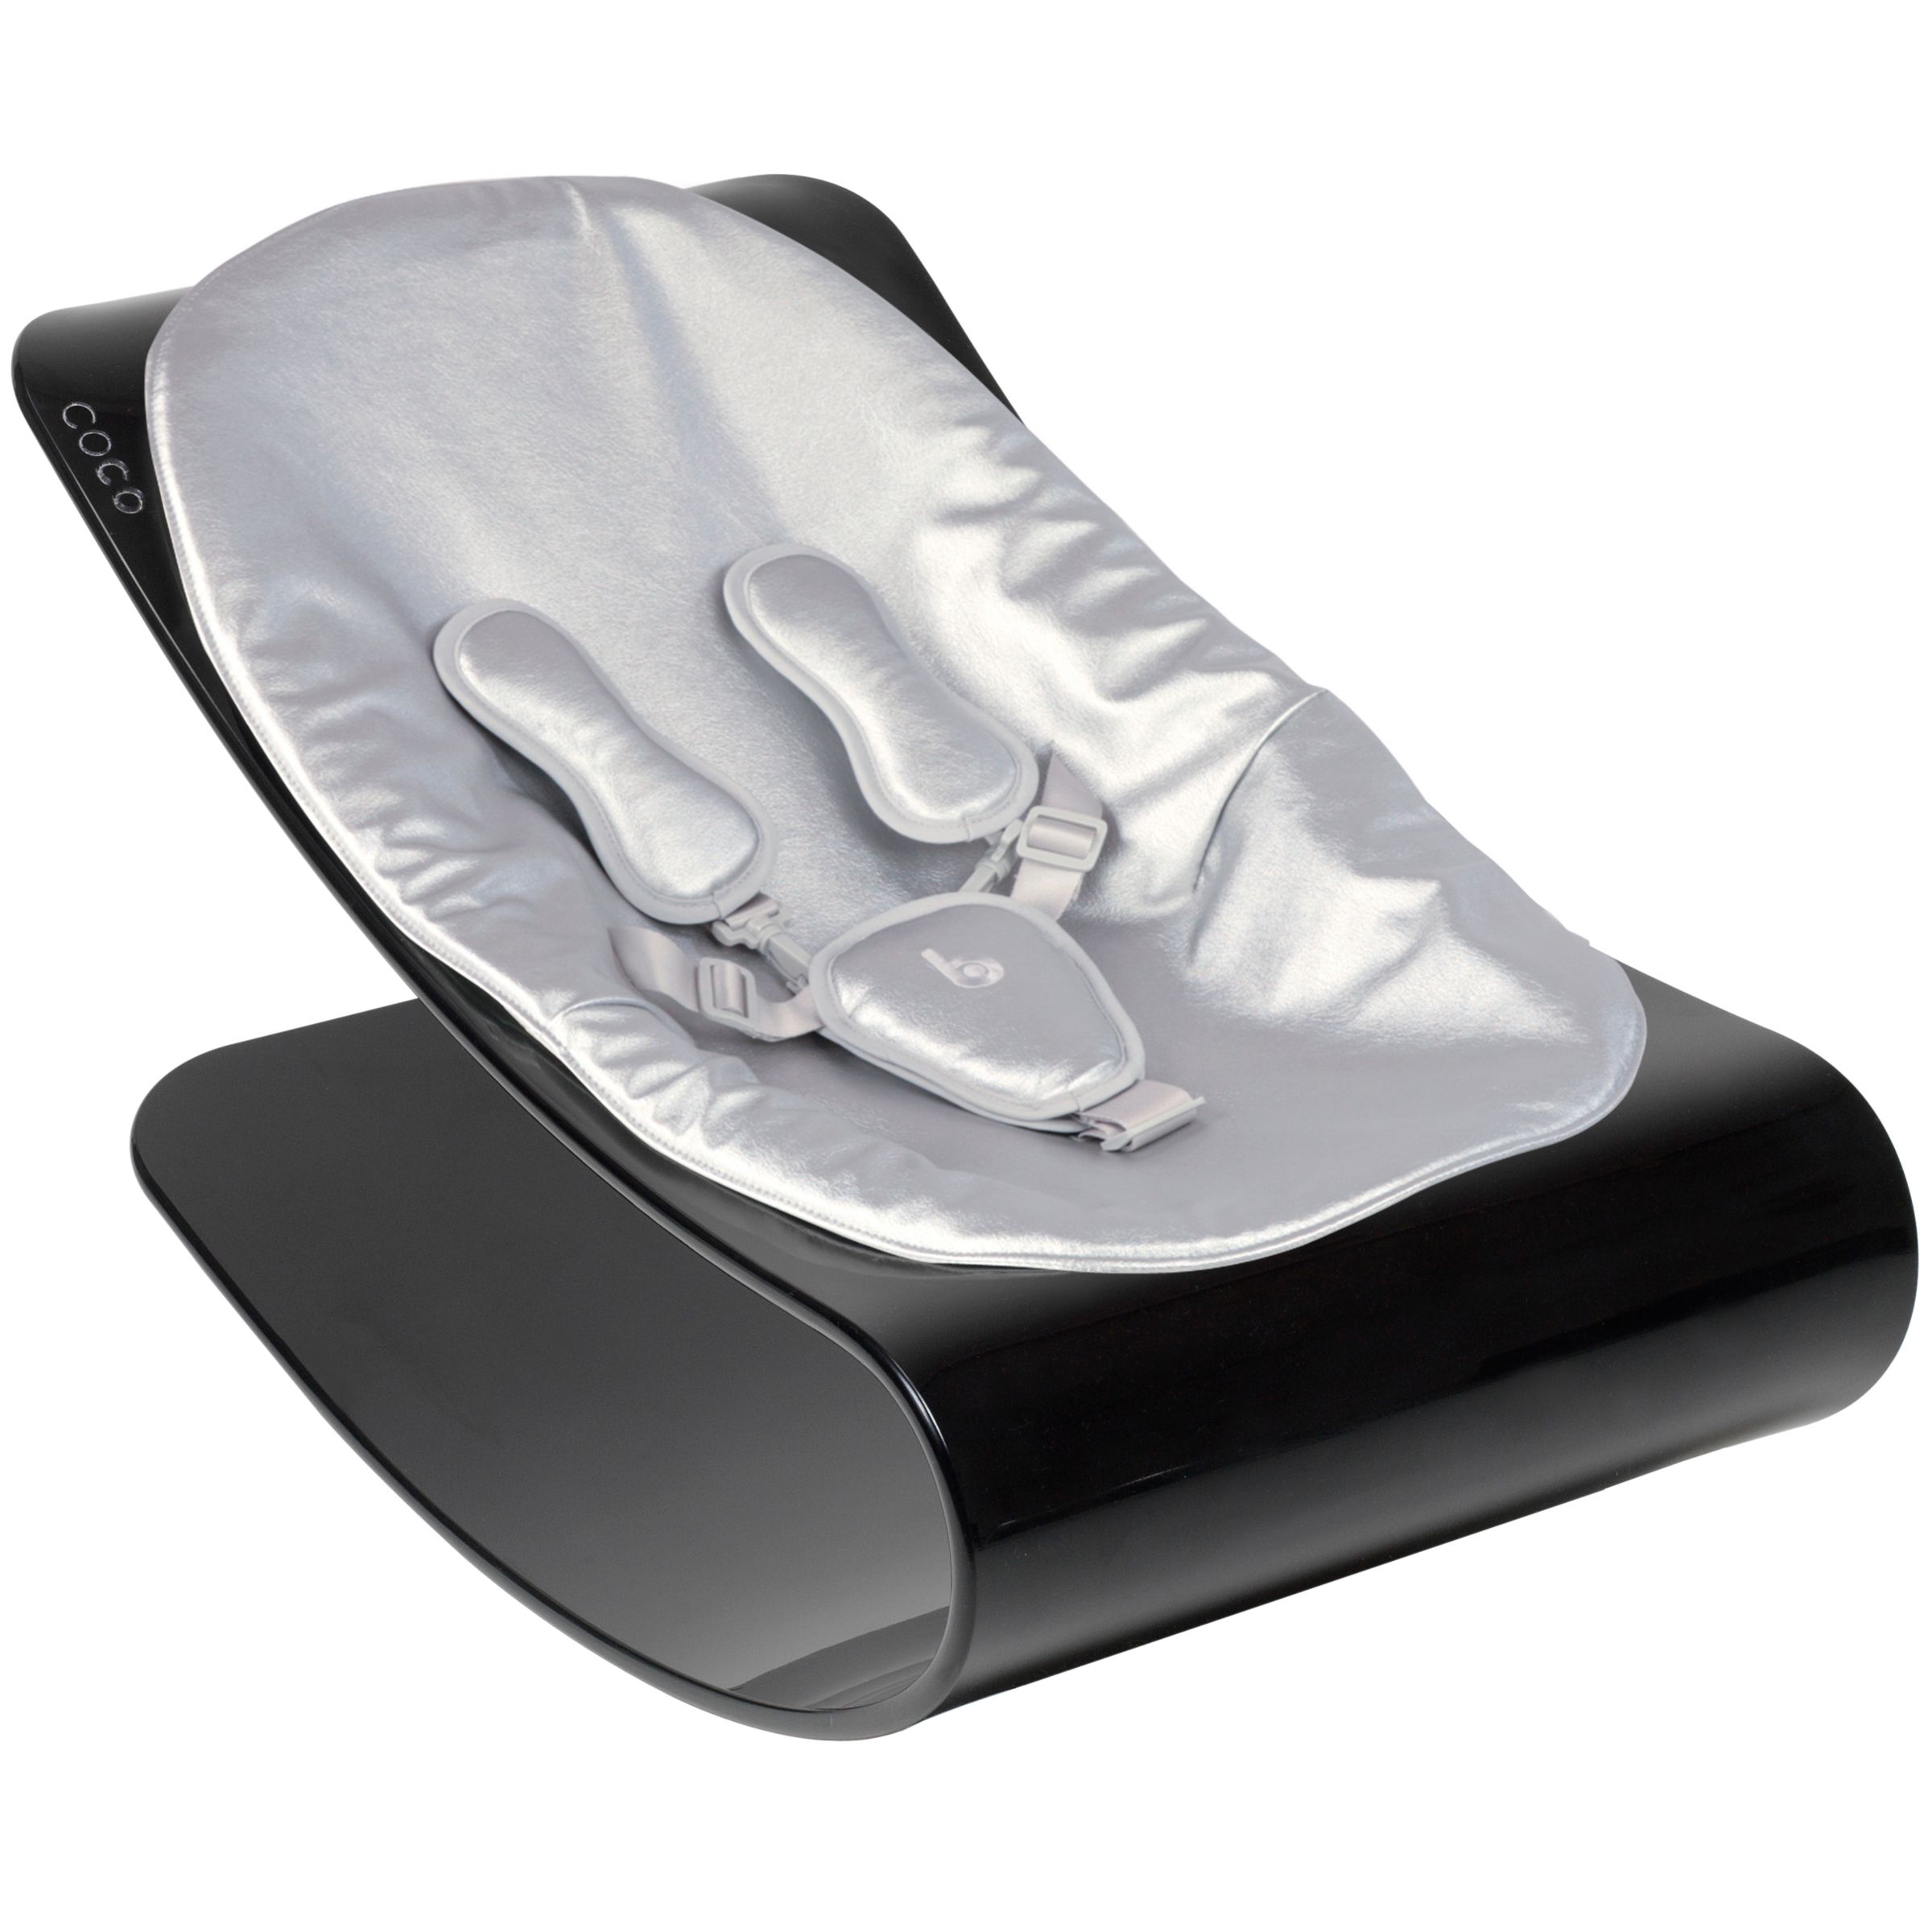 bloom Coco Plexistyle Baby Lounger, Ebony Black with Lunar Silver at John Lewis